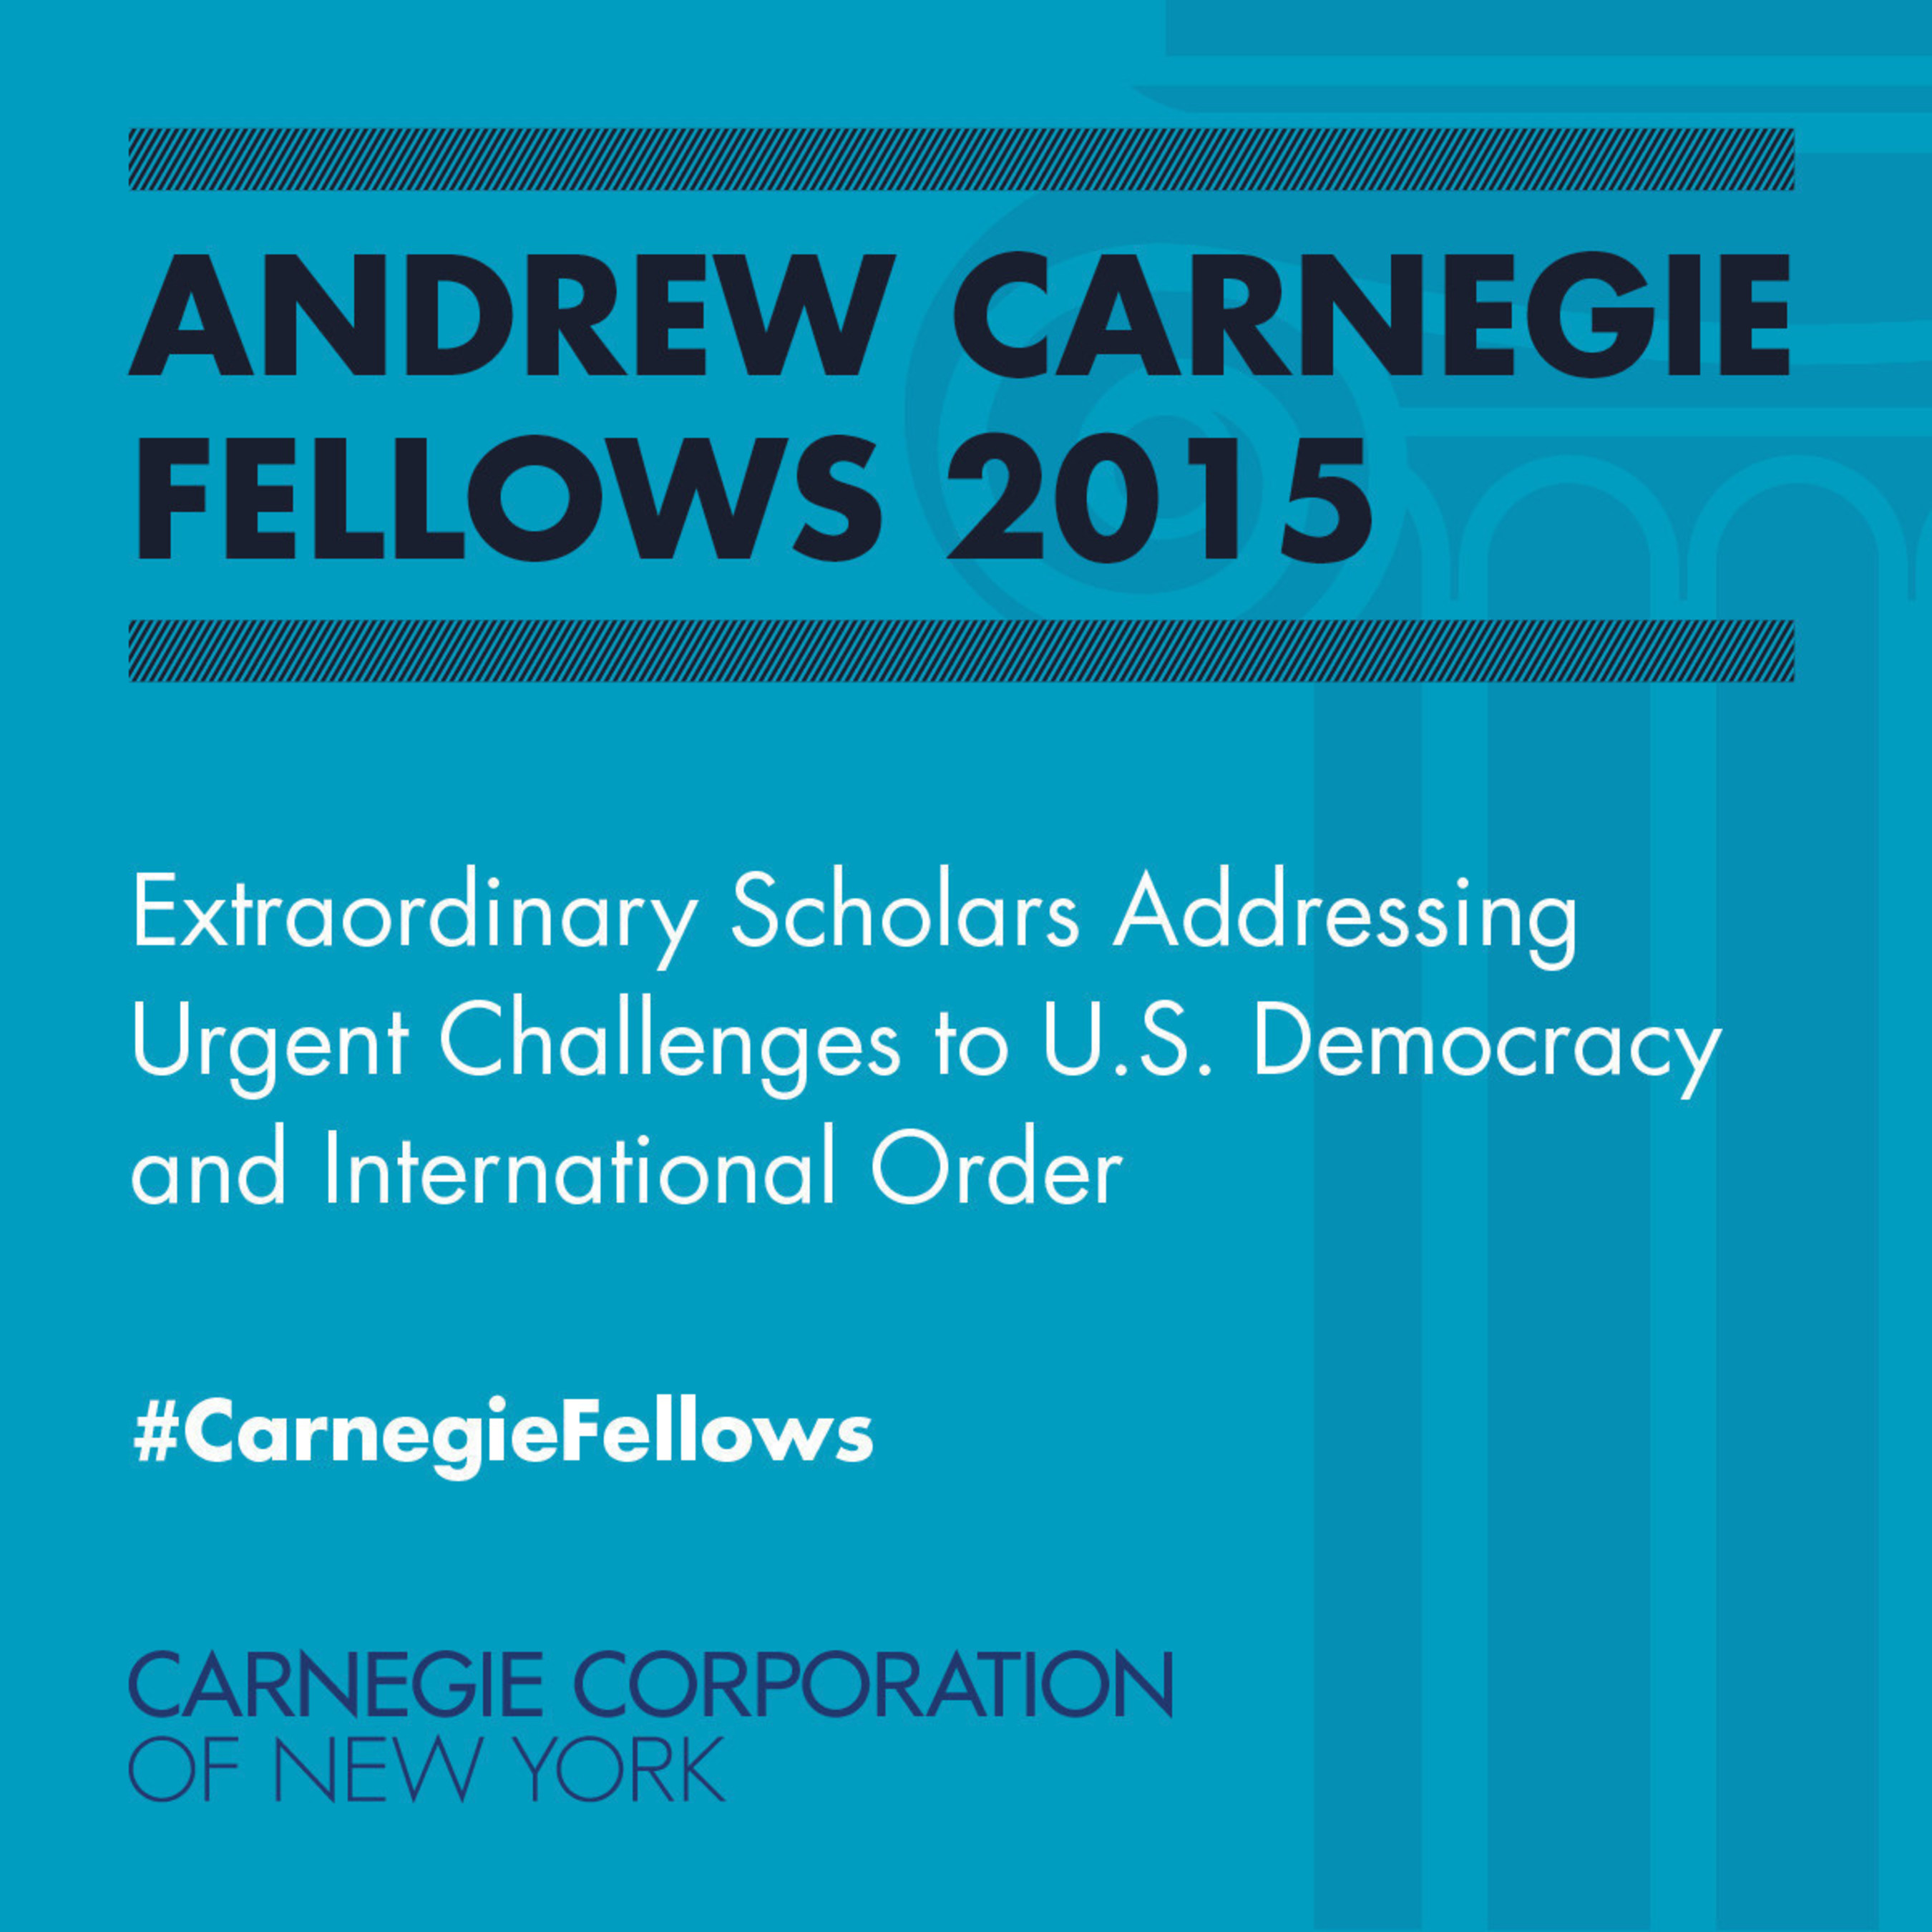 New $6 million Andrew Carnegie Fellowship Program Supports Social Sciences and Humanities: 32 Fellows Announced by Carnegie Corporation of New York.